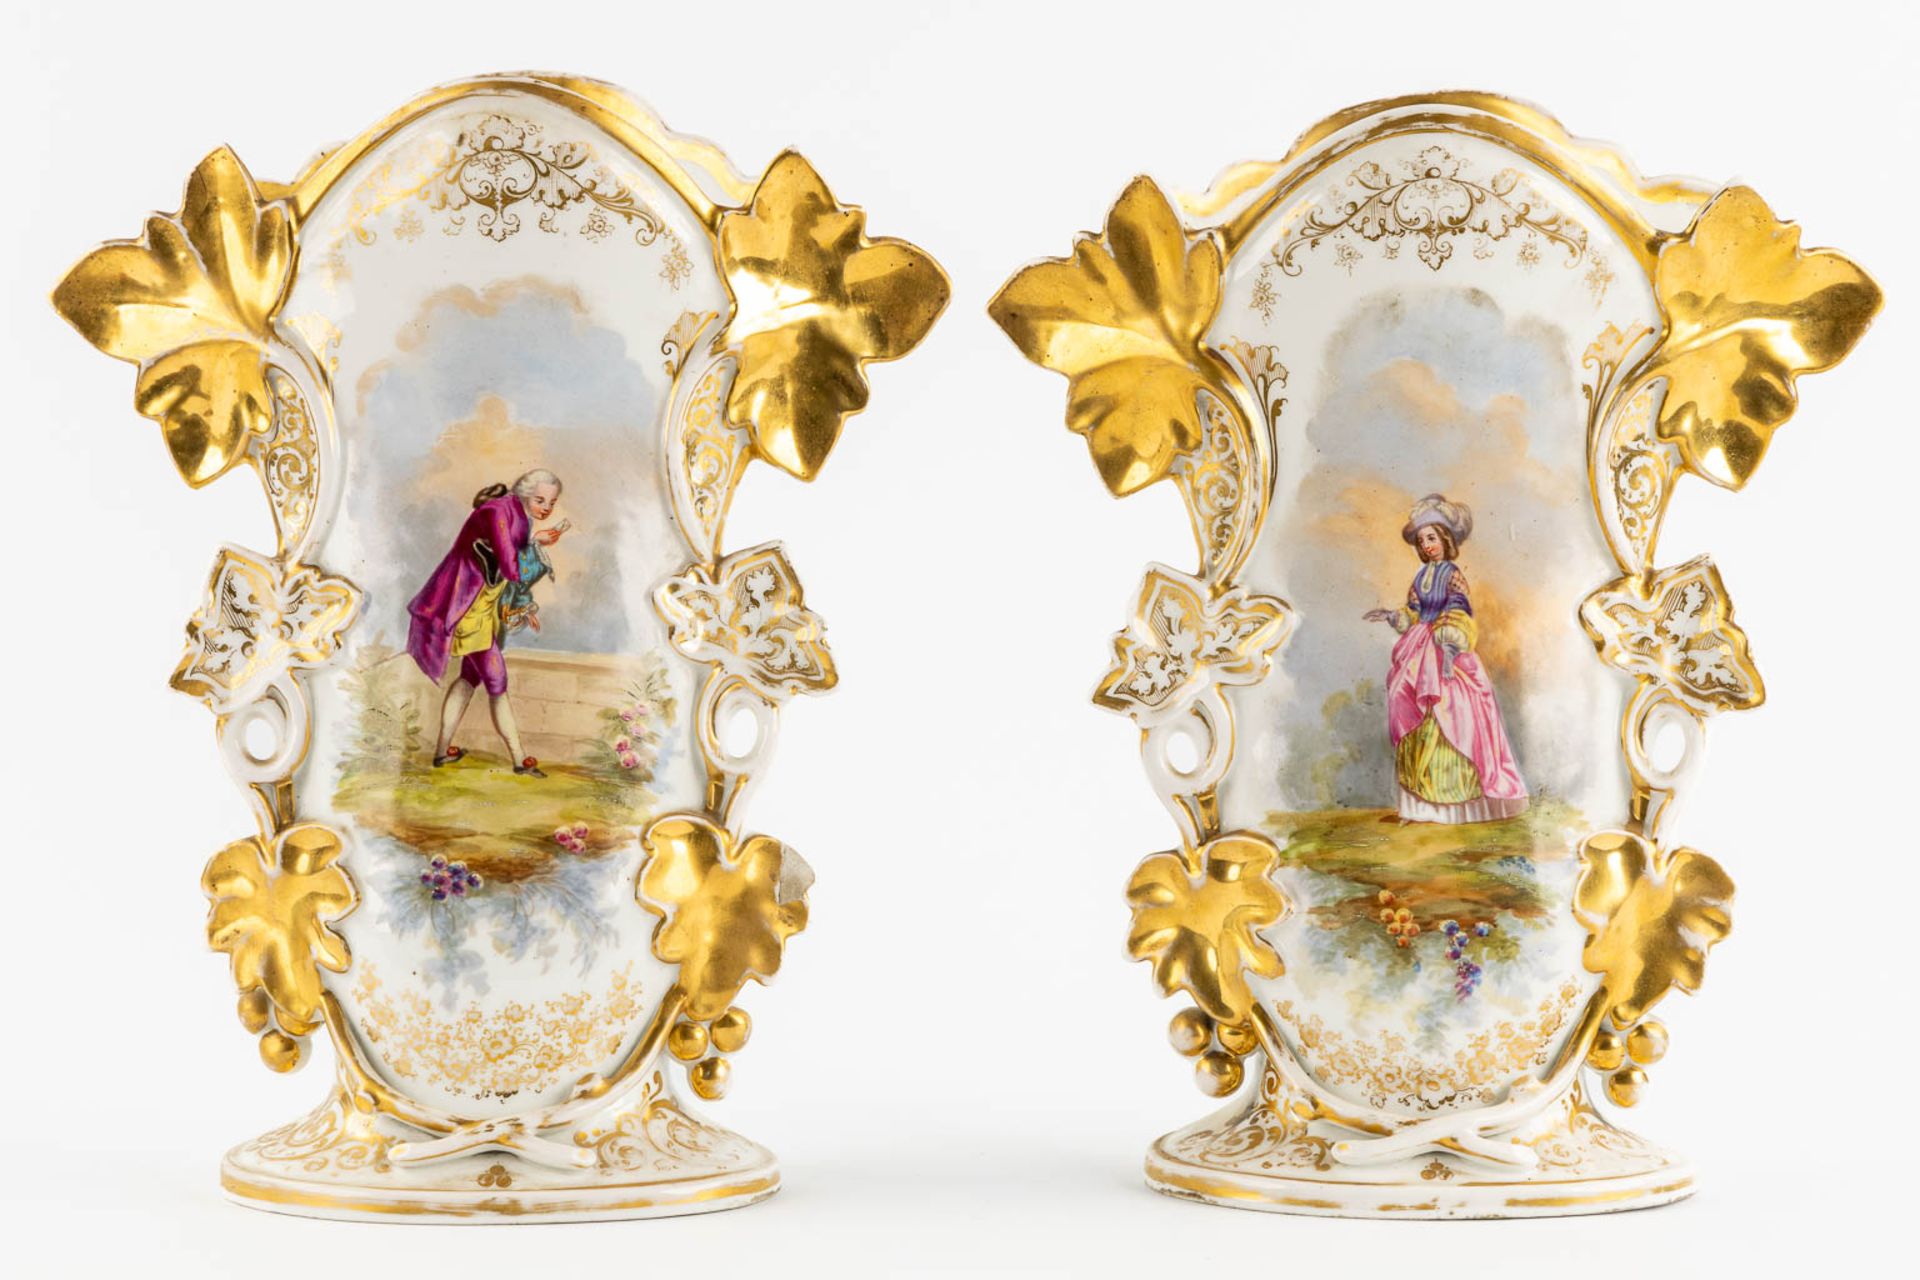 Two pair of Vieux Bruxelles vases, decorated with flowers and figurines. (L:20 x W:26 x H:39 cm) - Bild 3 aus 19